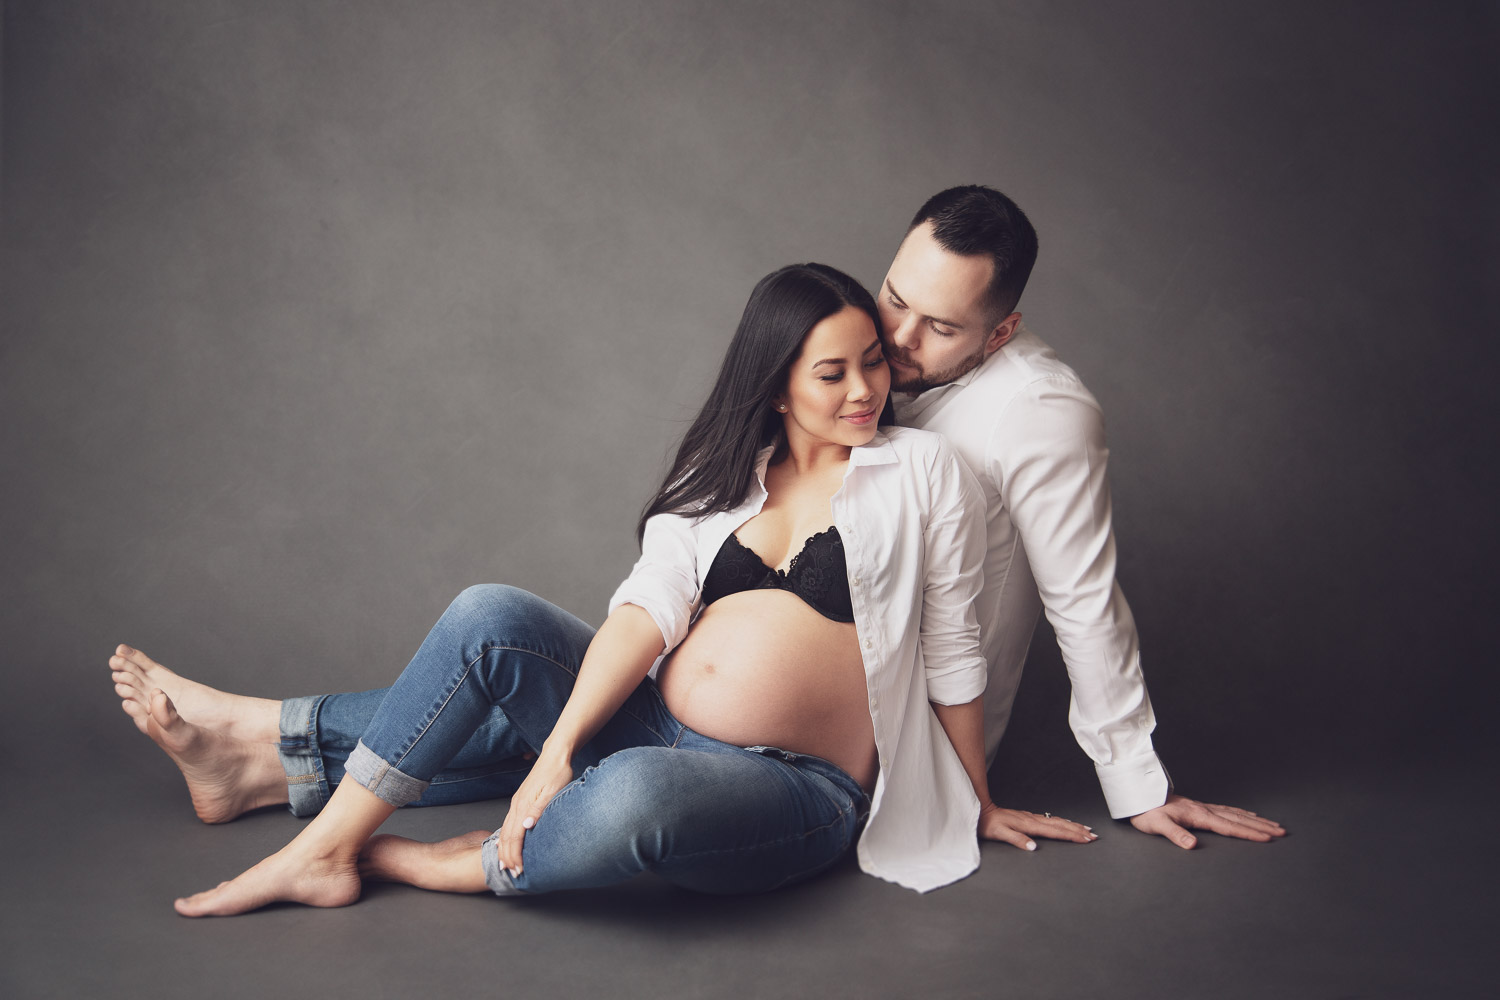 artistic and casual maternity shot with studio lighting and texture background